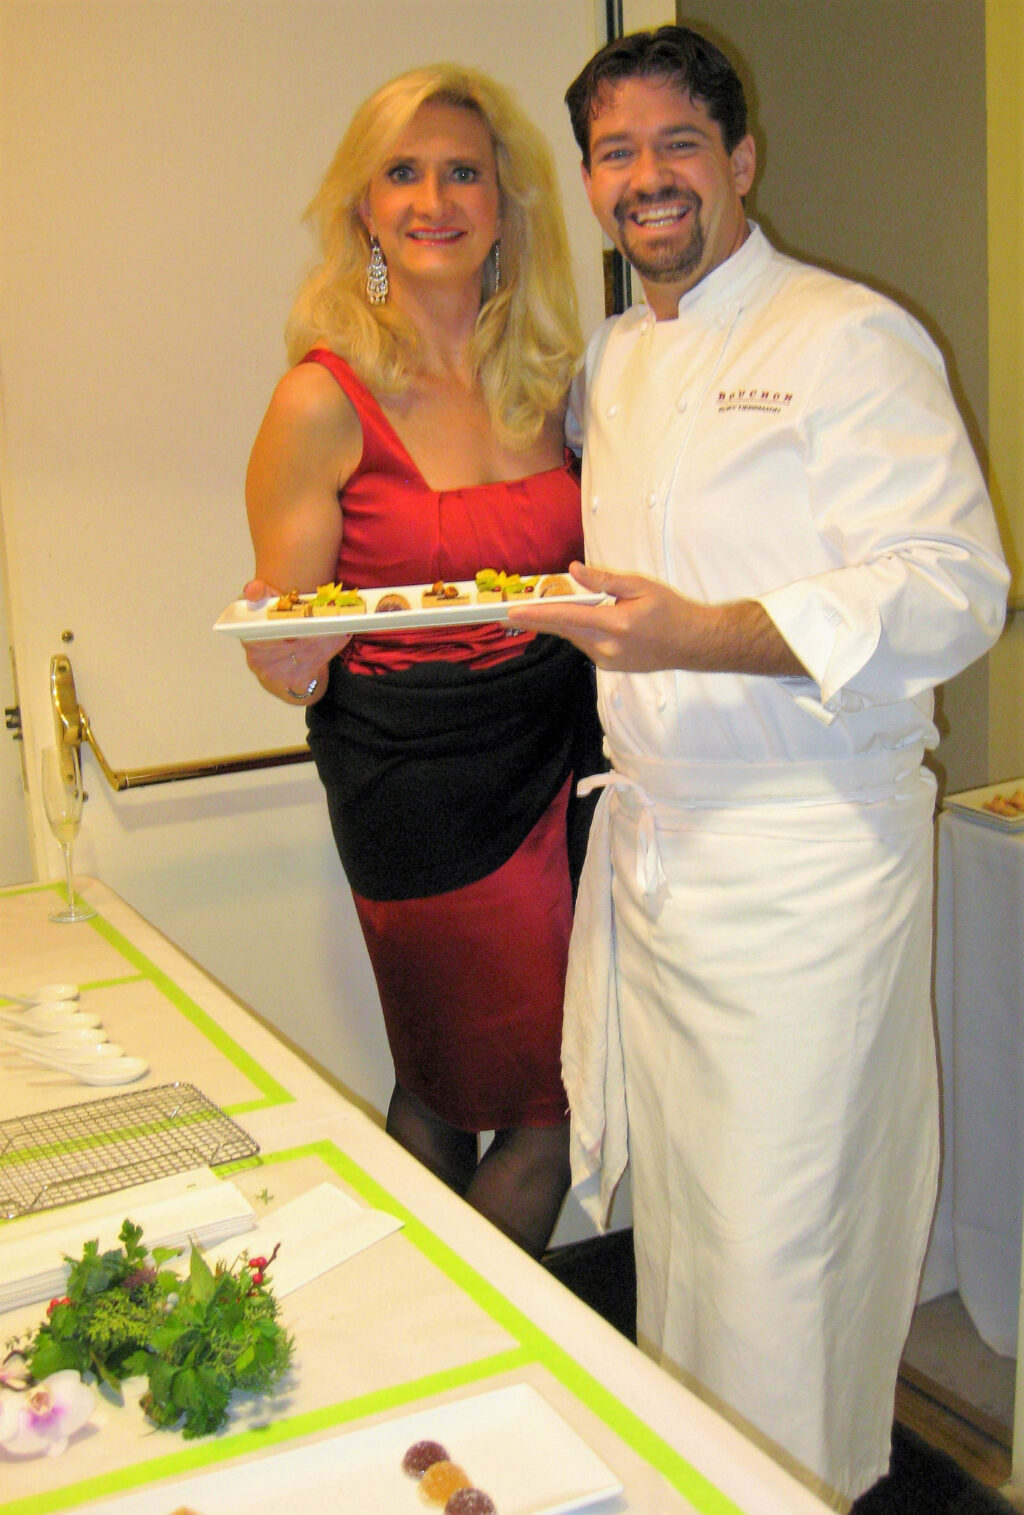 Executive chef Rory Herrmann of Bouchon Beverly Hills with Sophie Gayot